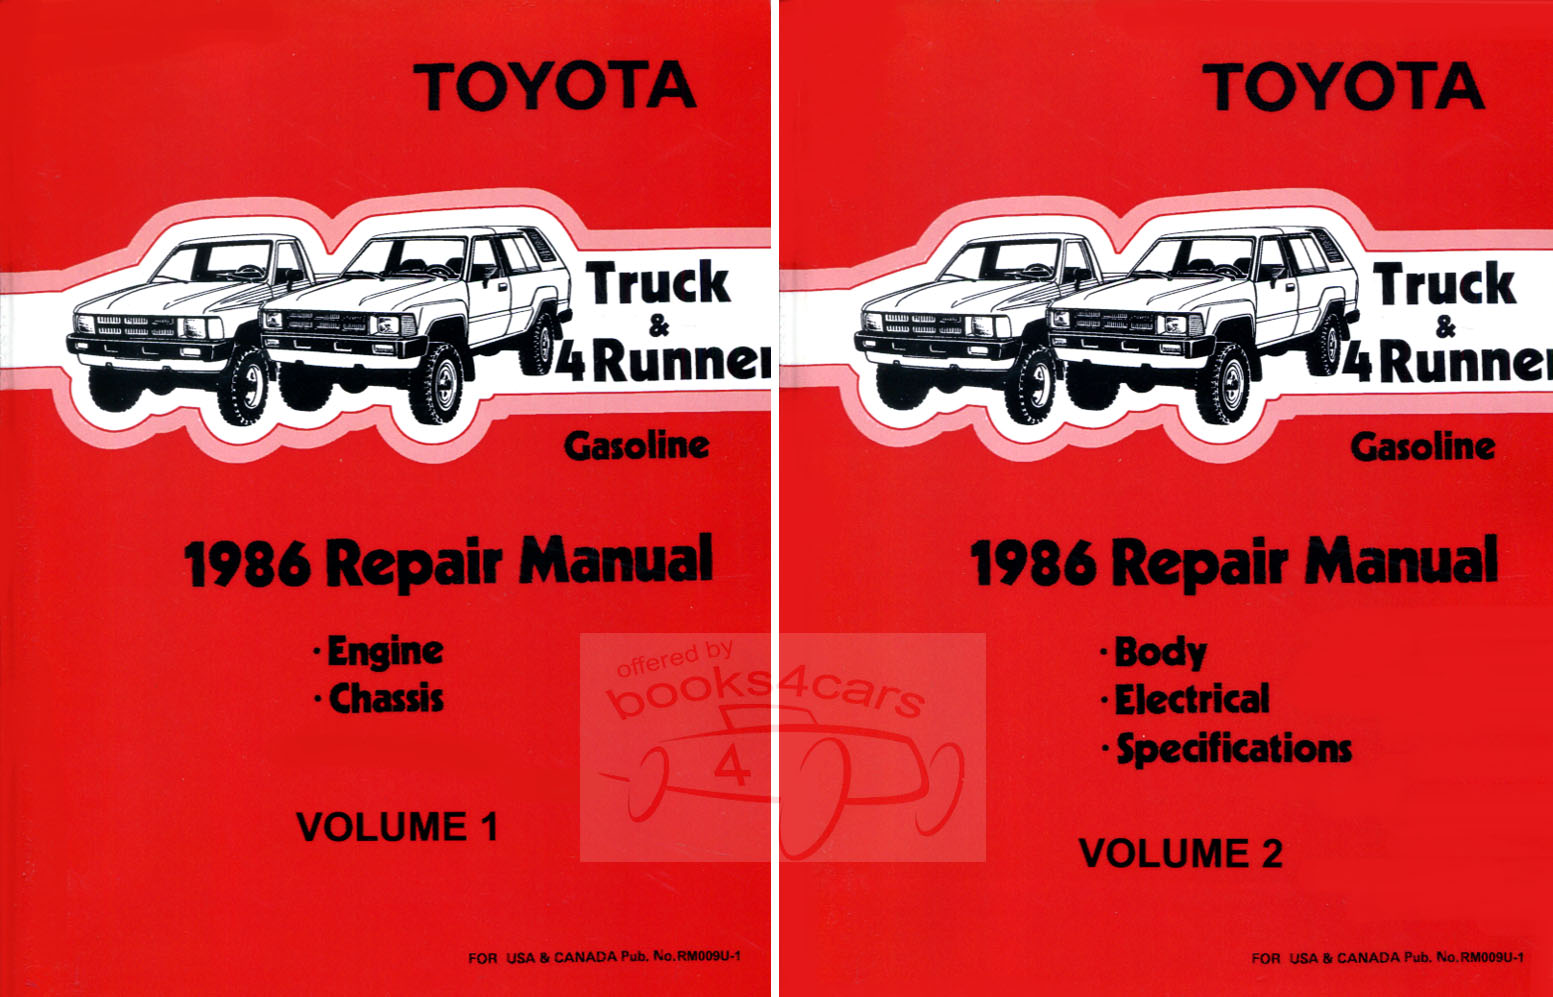 86 Truck & 4Runner Engine & Chassis & Body Shop Service Repair Manual by Toyota gasoline only